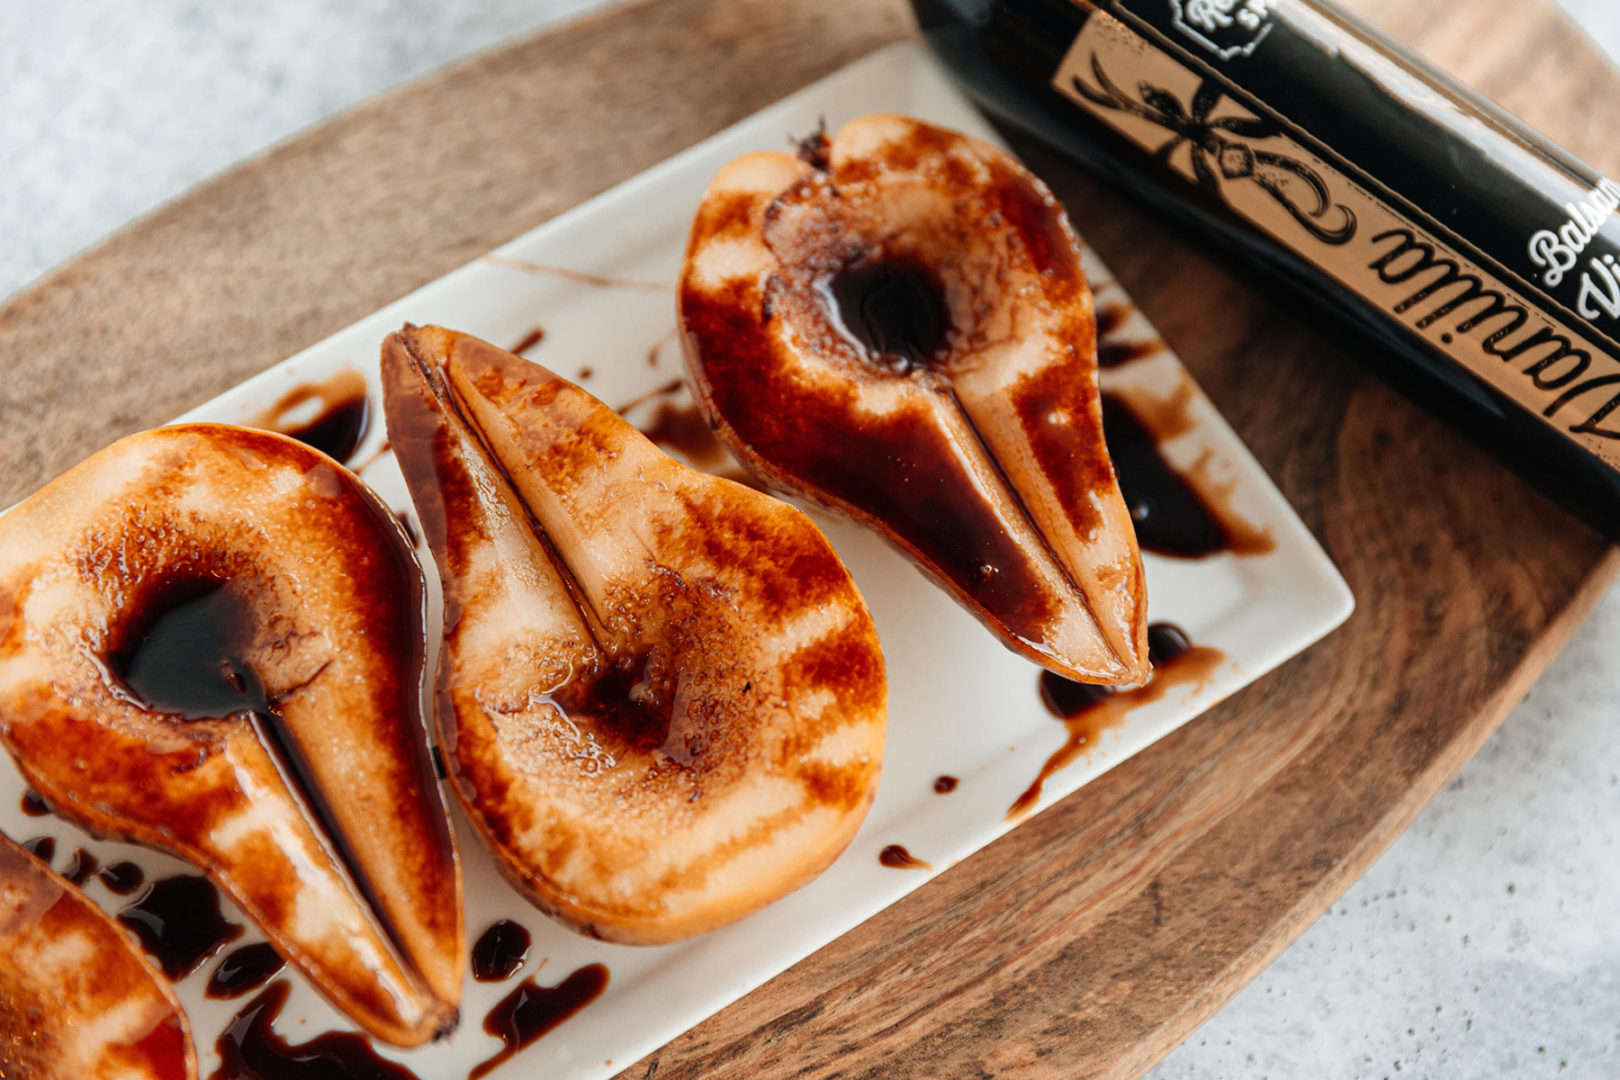 Rose’ Poached Pears with Vanilla Balsamic